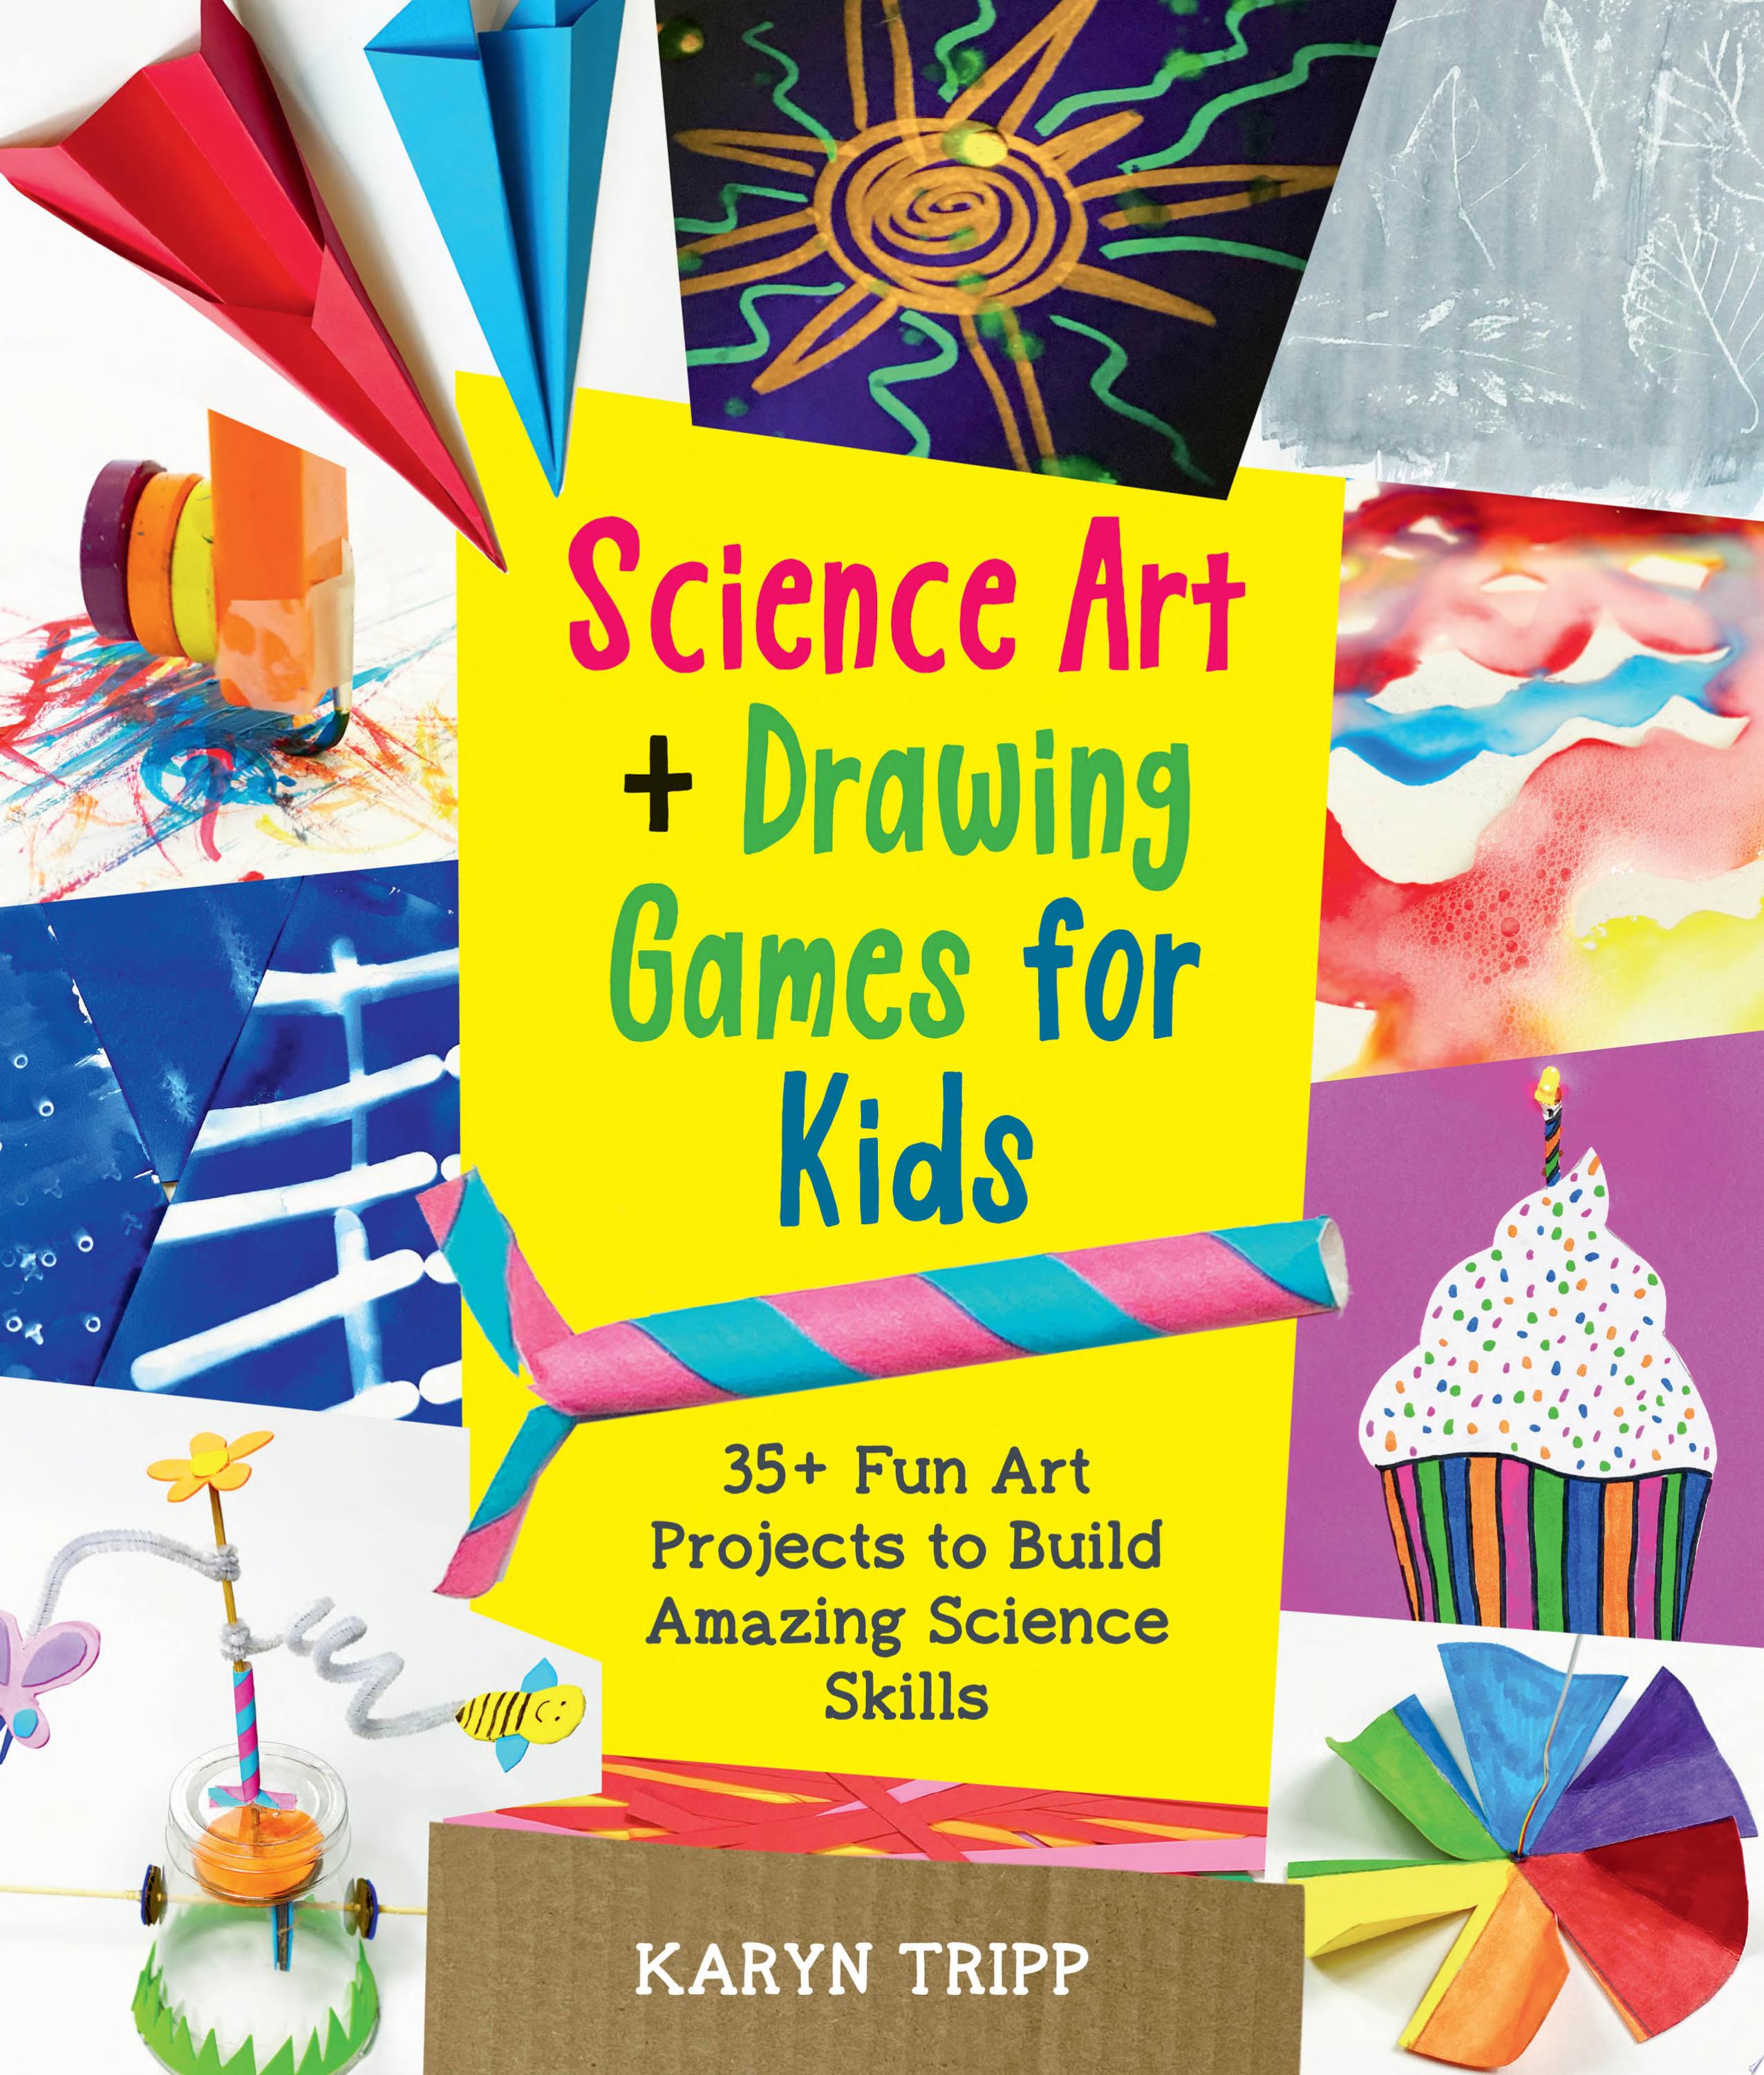 Image for "Science Art and Drawing Games for Kids"